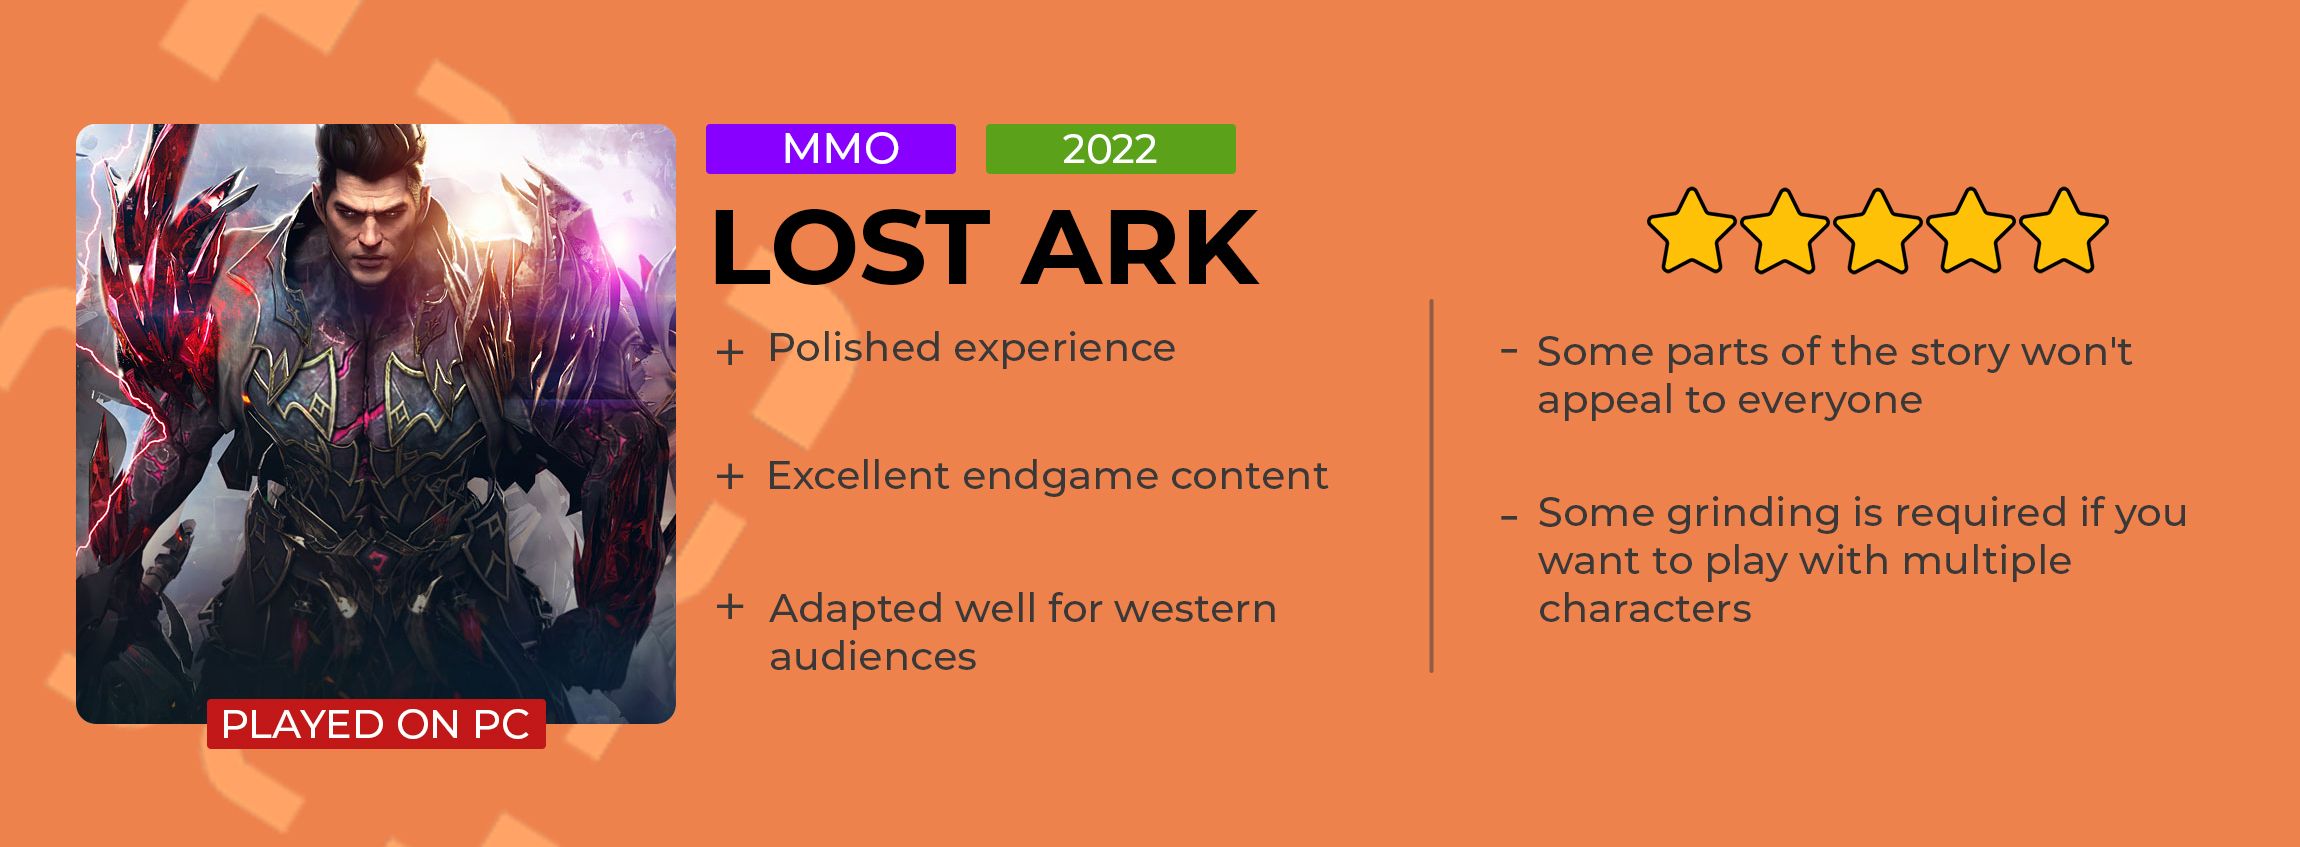 lost_ark_review_card